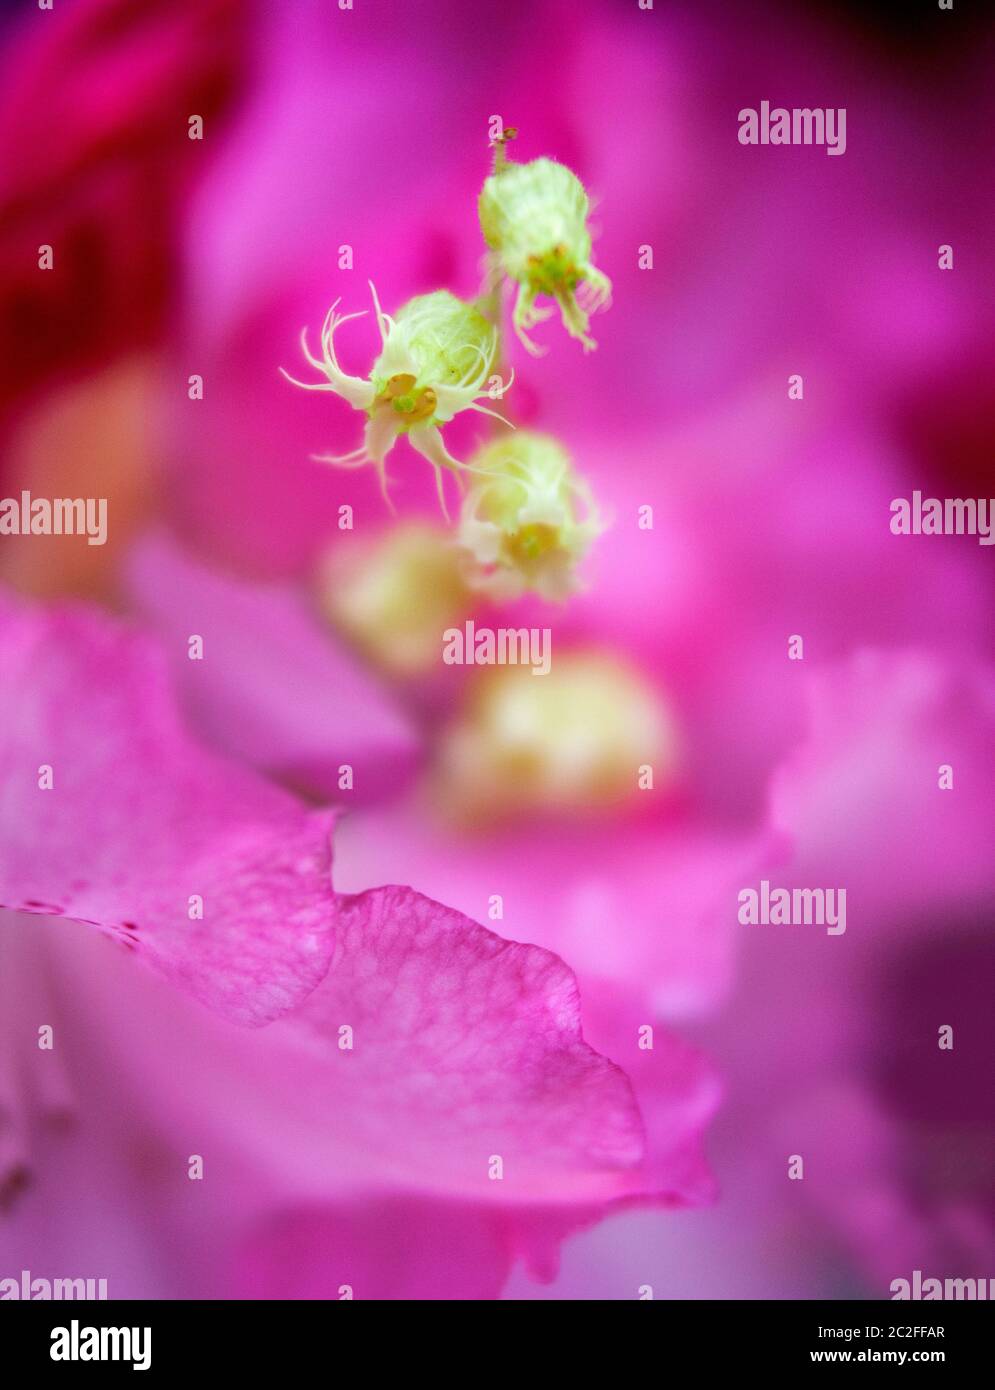 LB00211-00.....WASHINGTON - Yellow flower in a pink and white rhododendron. Lensbaby Edge 50 Image. Stock Photo